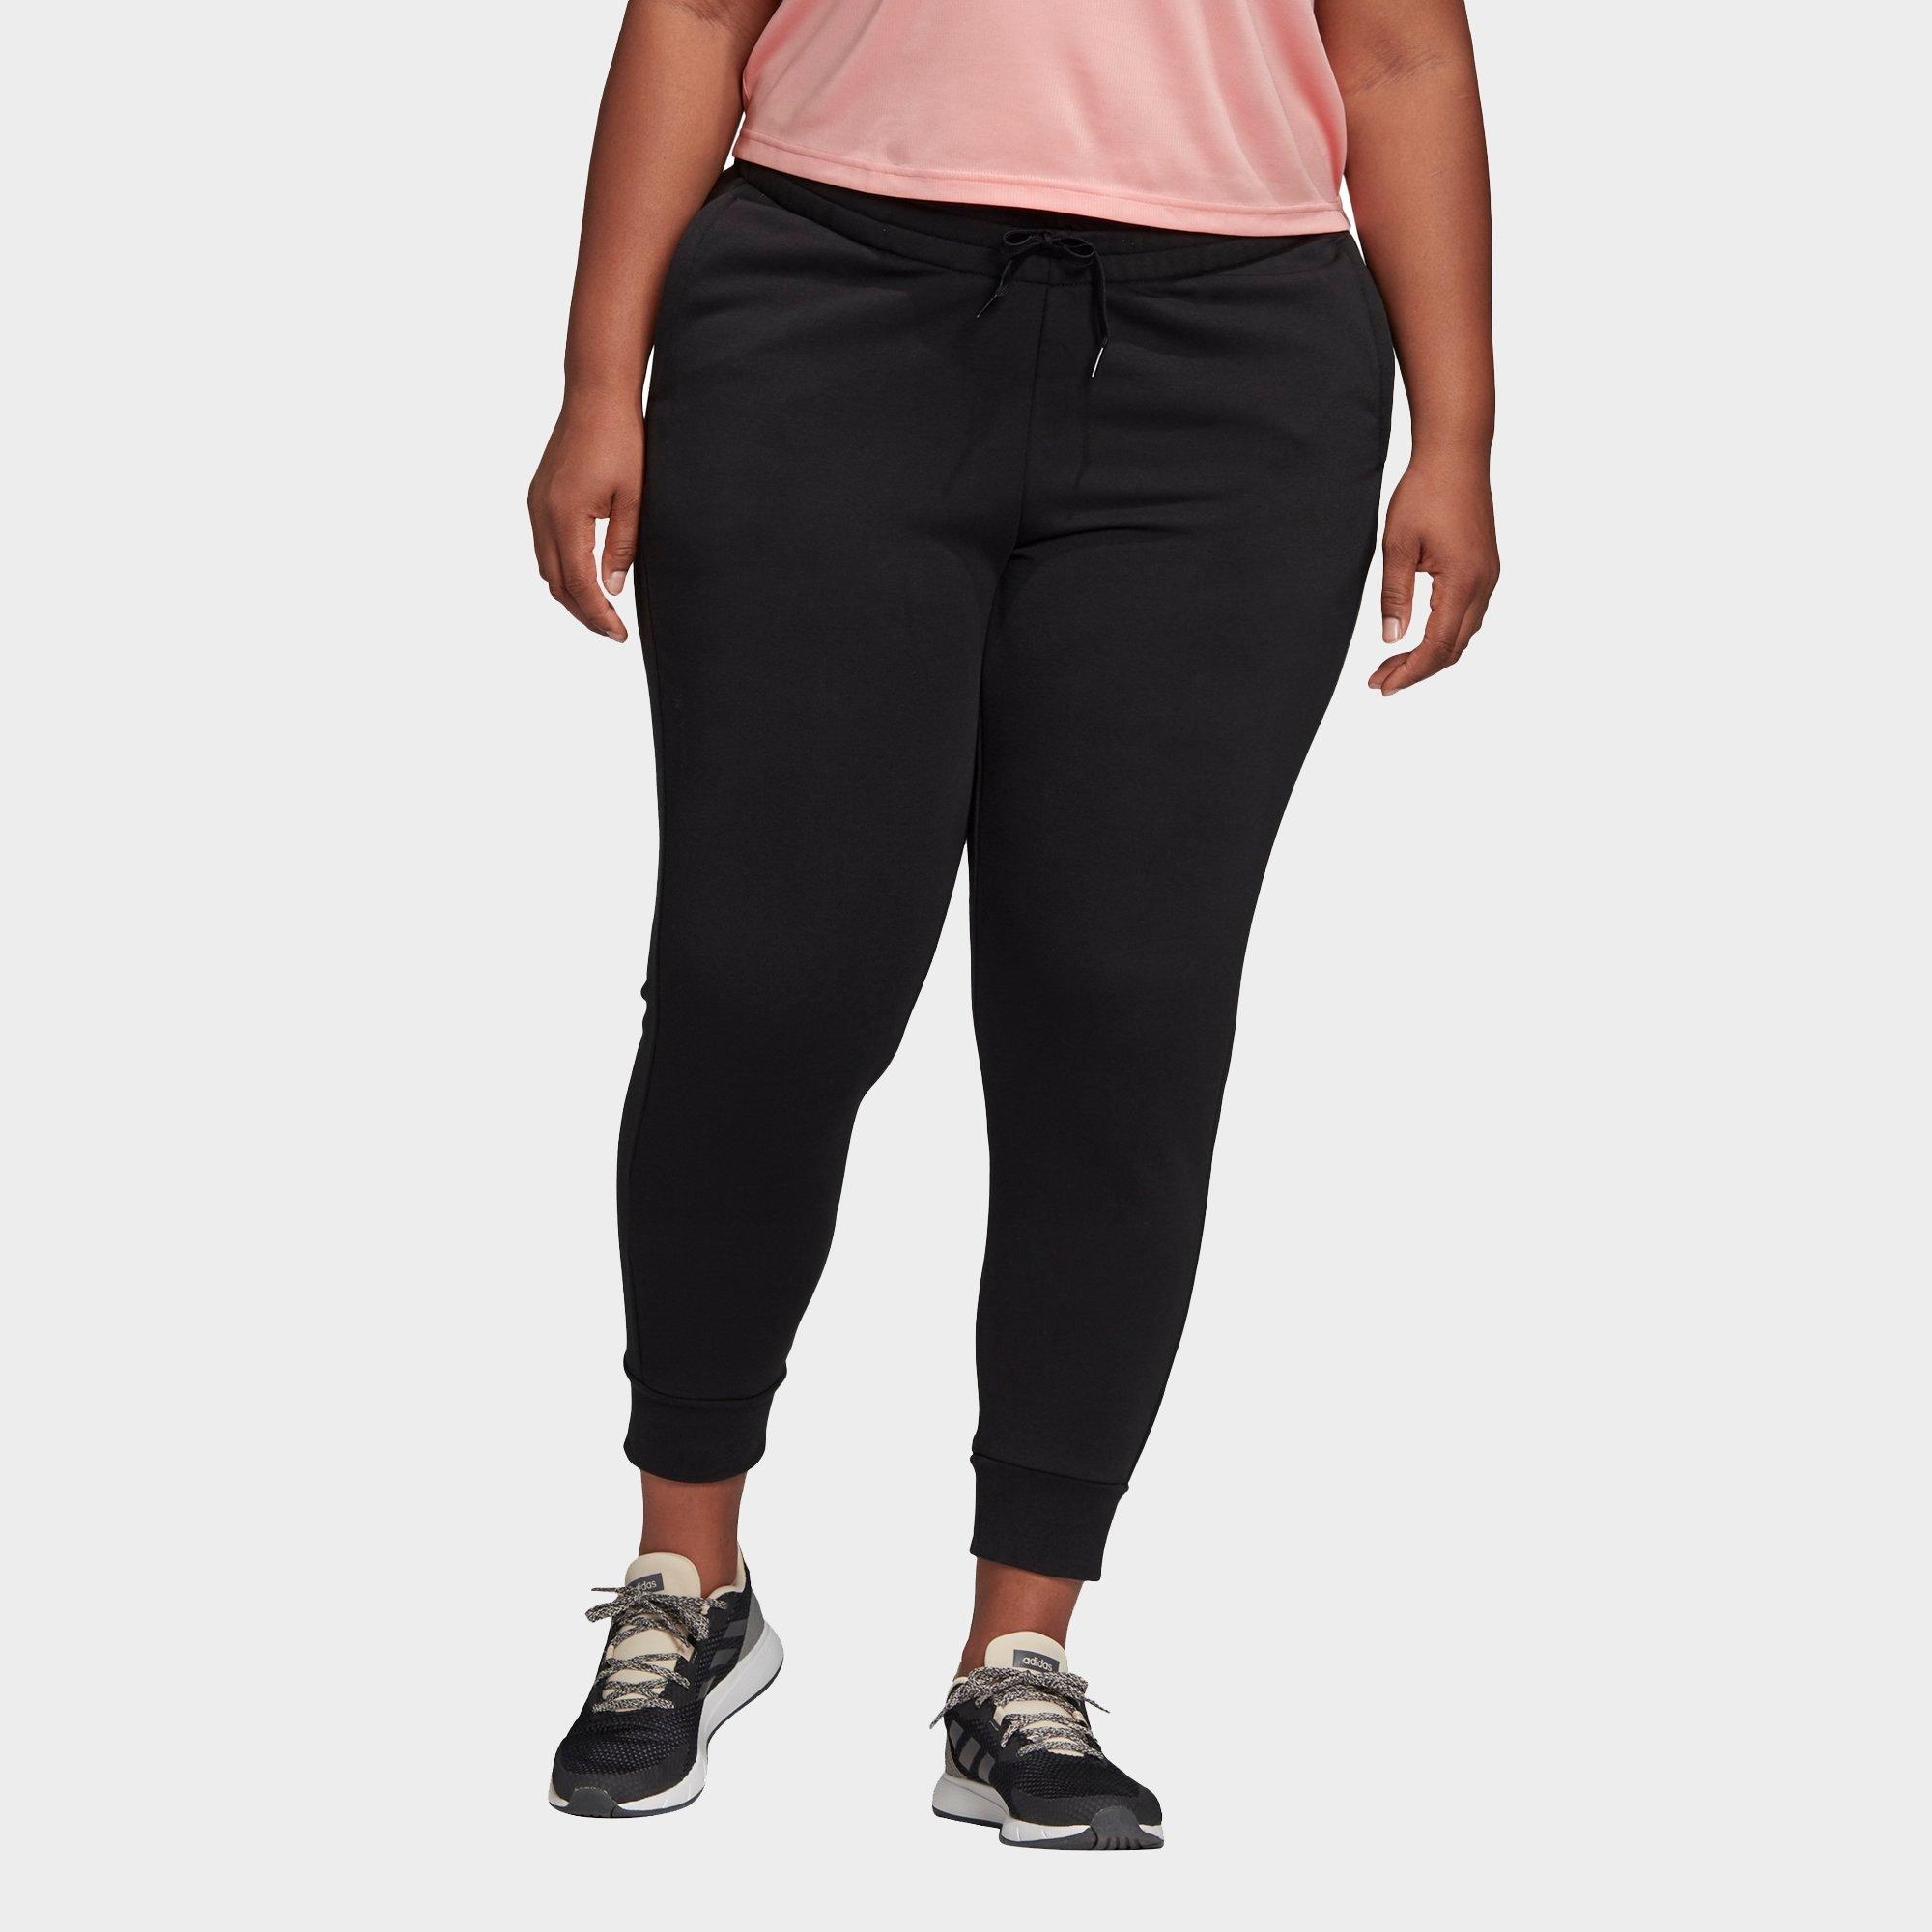 UPC 193105001628 product image for Adidas Women's Essentials Jogger Pants (Plus Size) in Black Size 3X-Large Cotton | upcitemdb.com